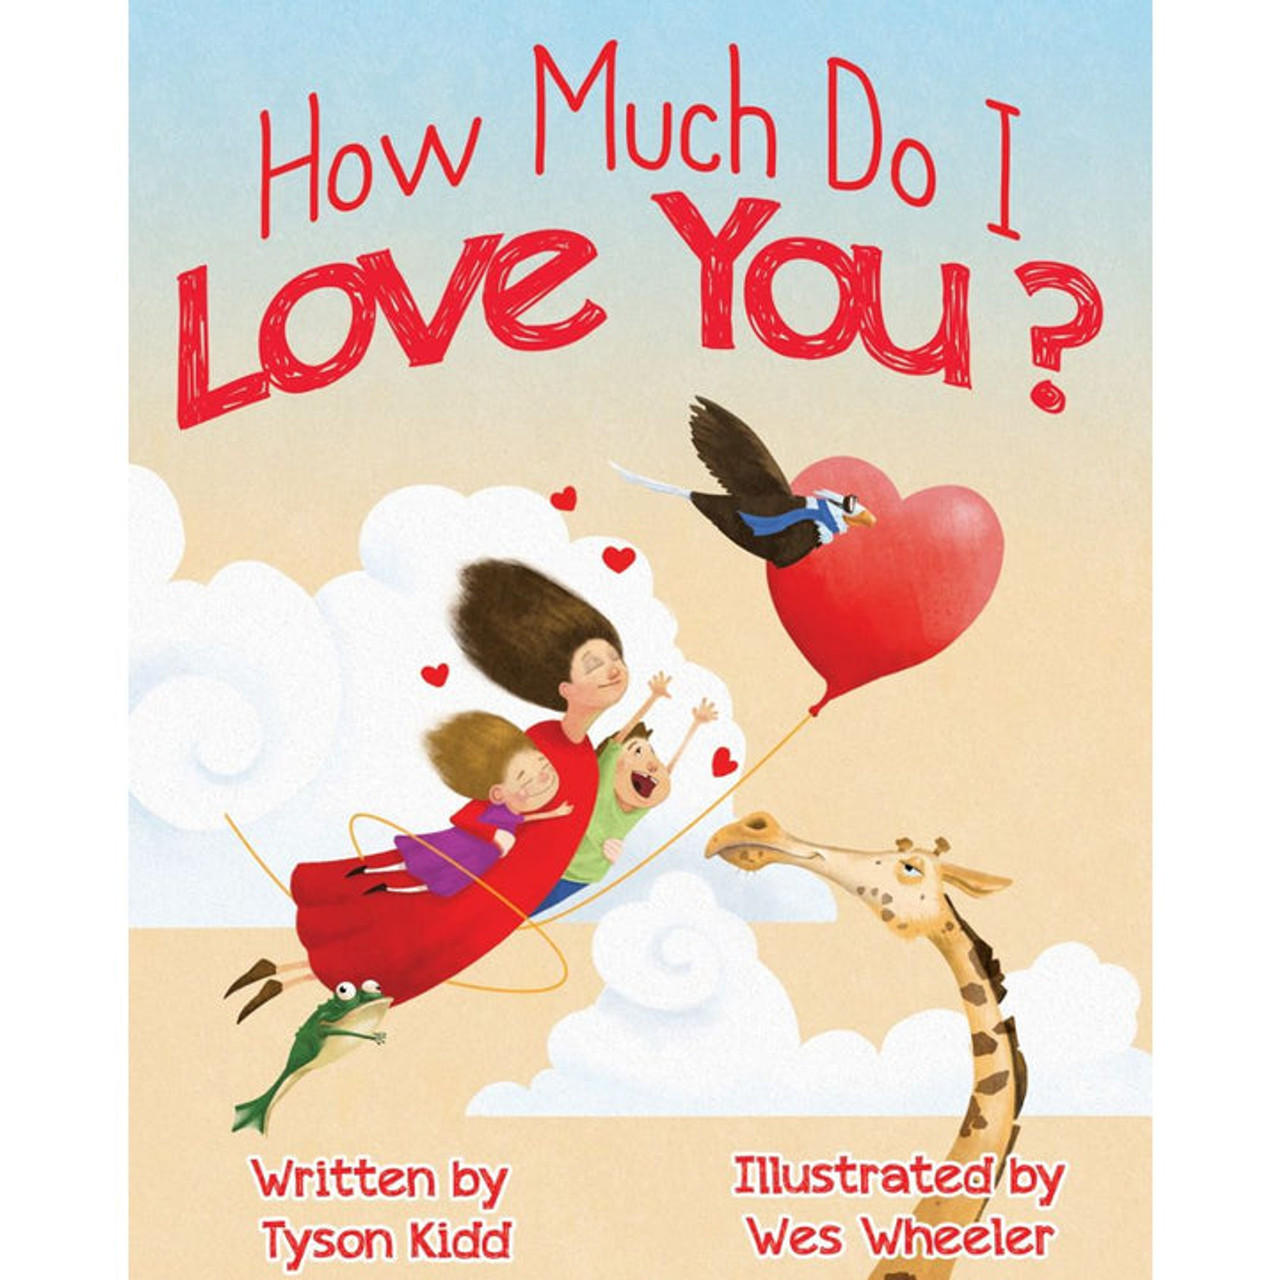 How Much Do I Love You? (Hardback) While Supplies Last